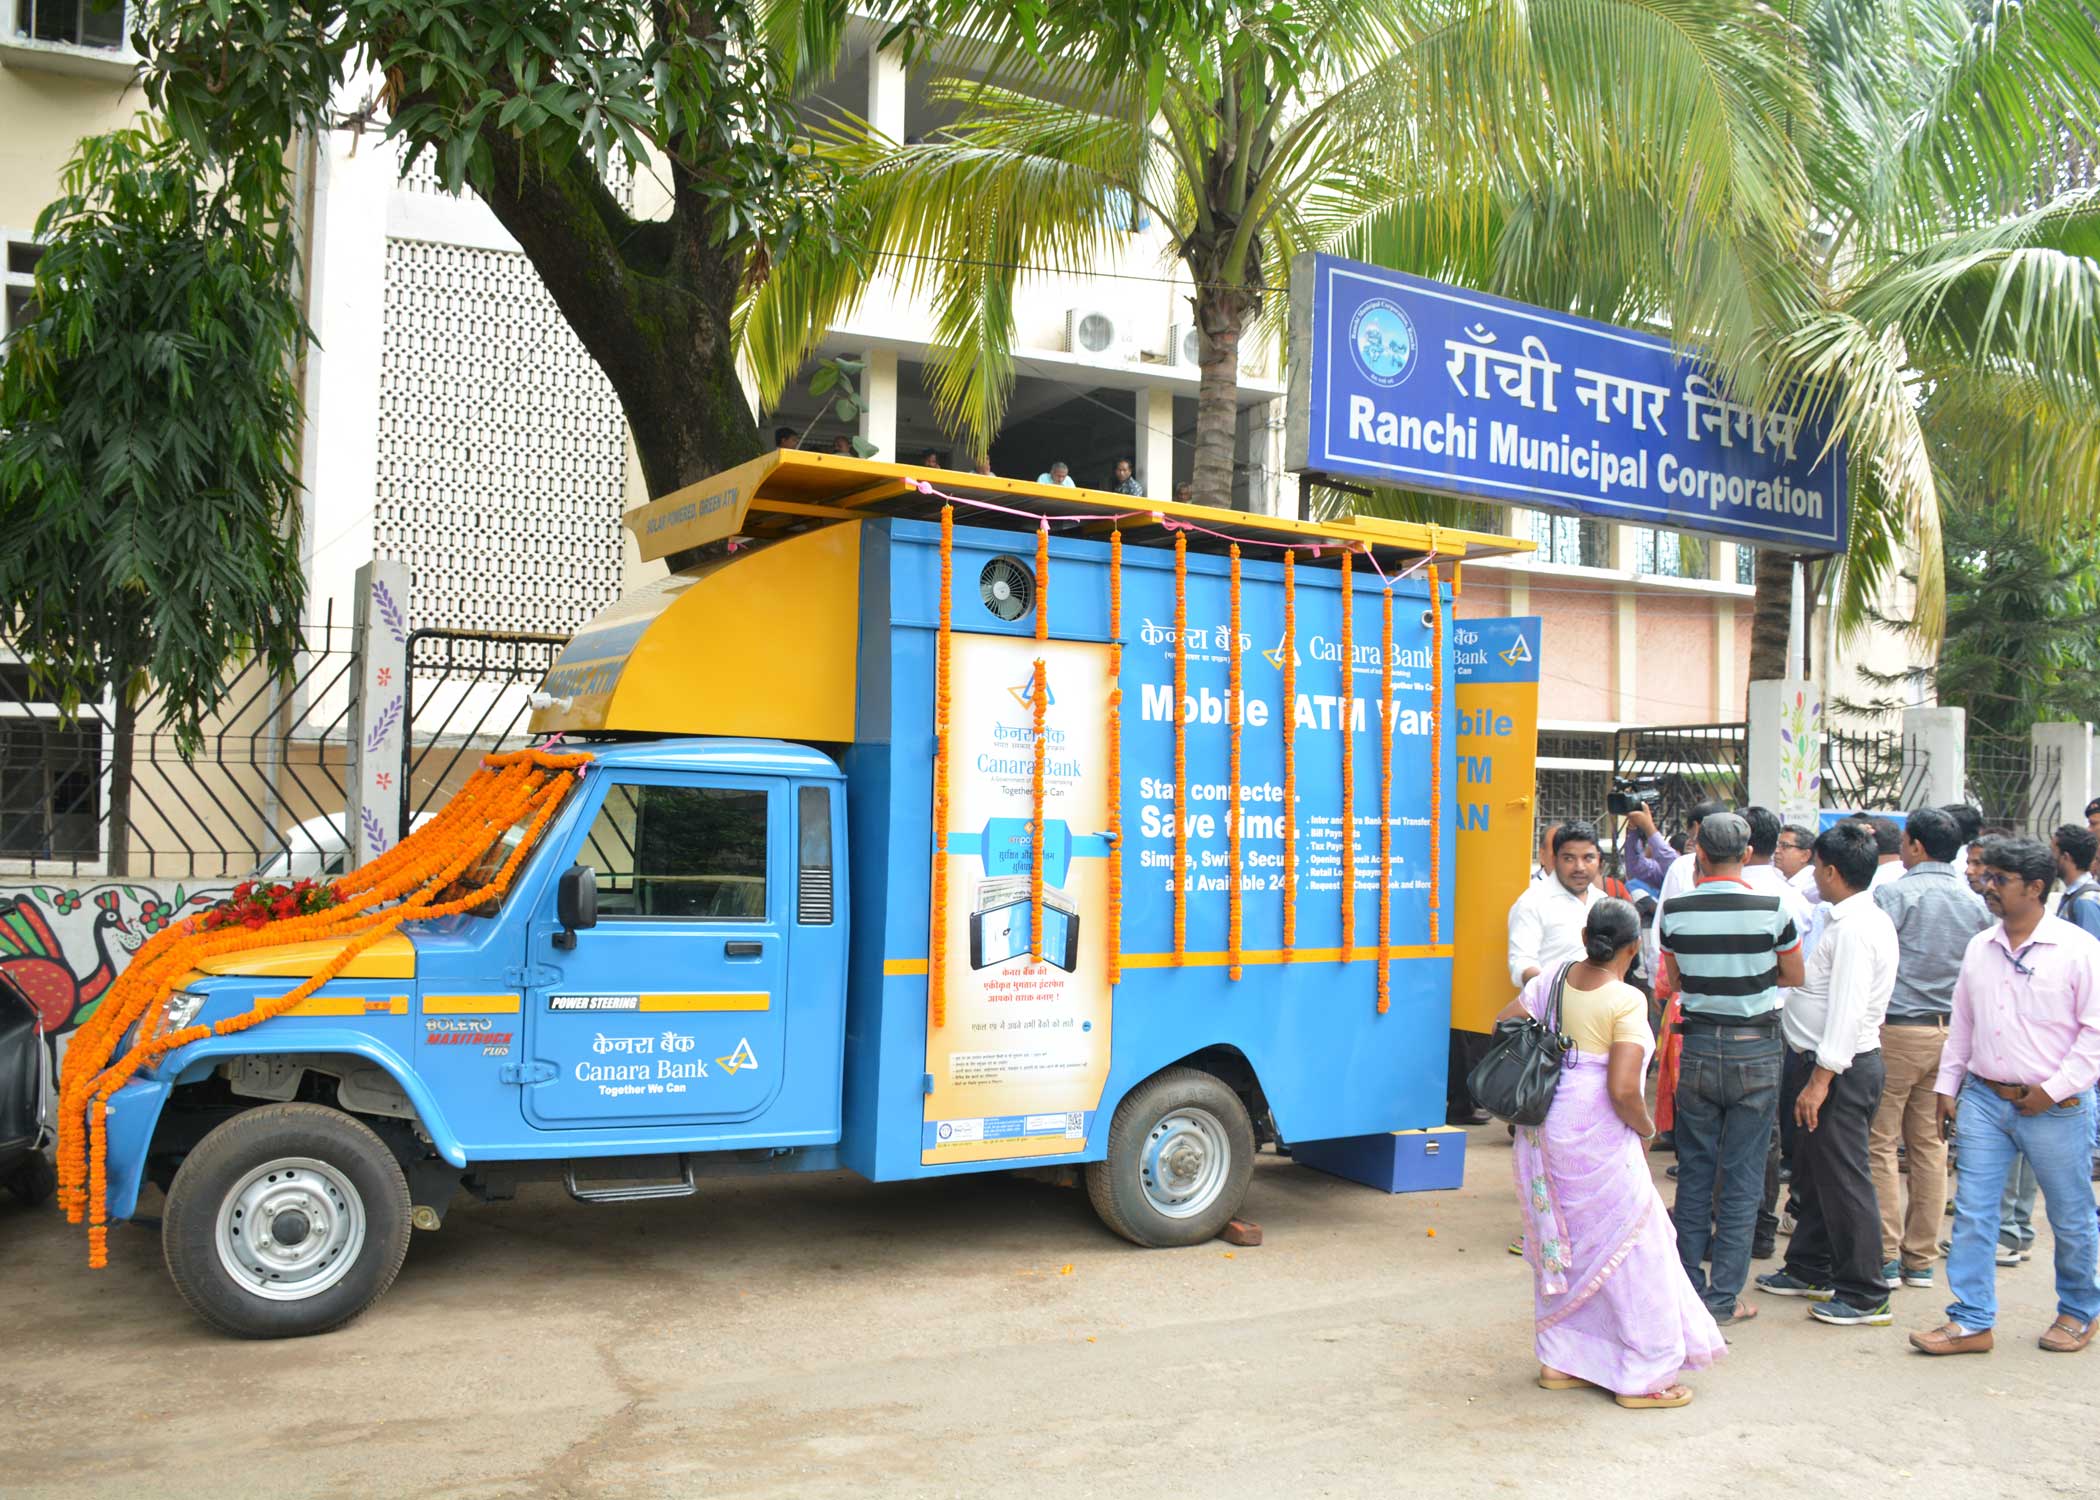 Mobile ATM by Canara Bank